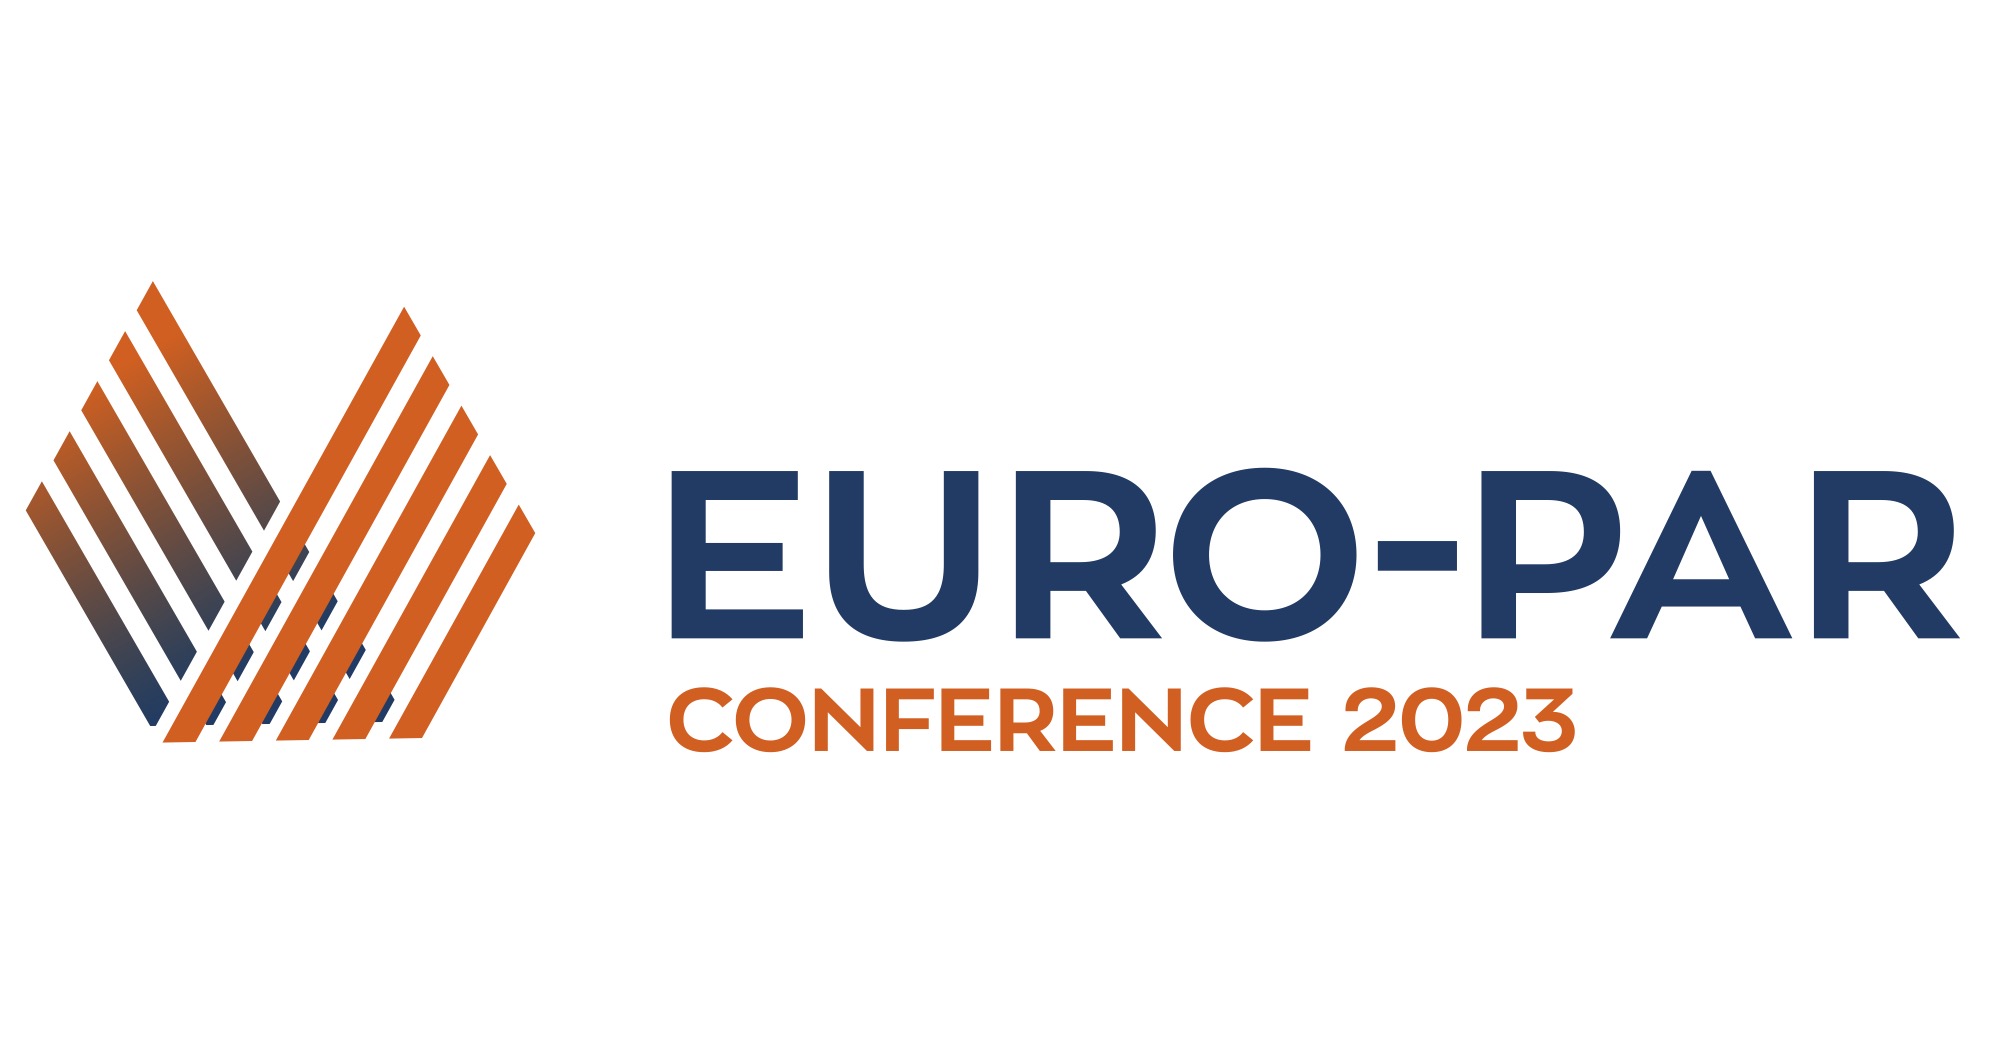 29th International European Conference on Parallel and Distributed Computing (Euro-Par 2023): Call for Posters and Demos